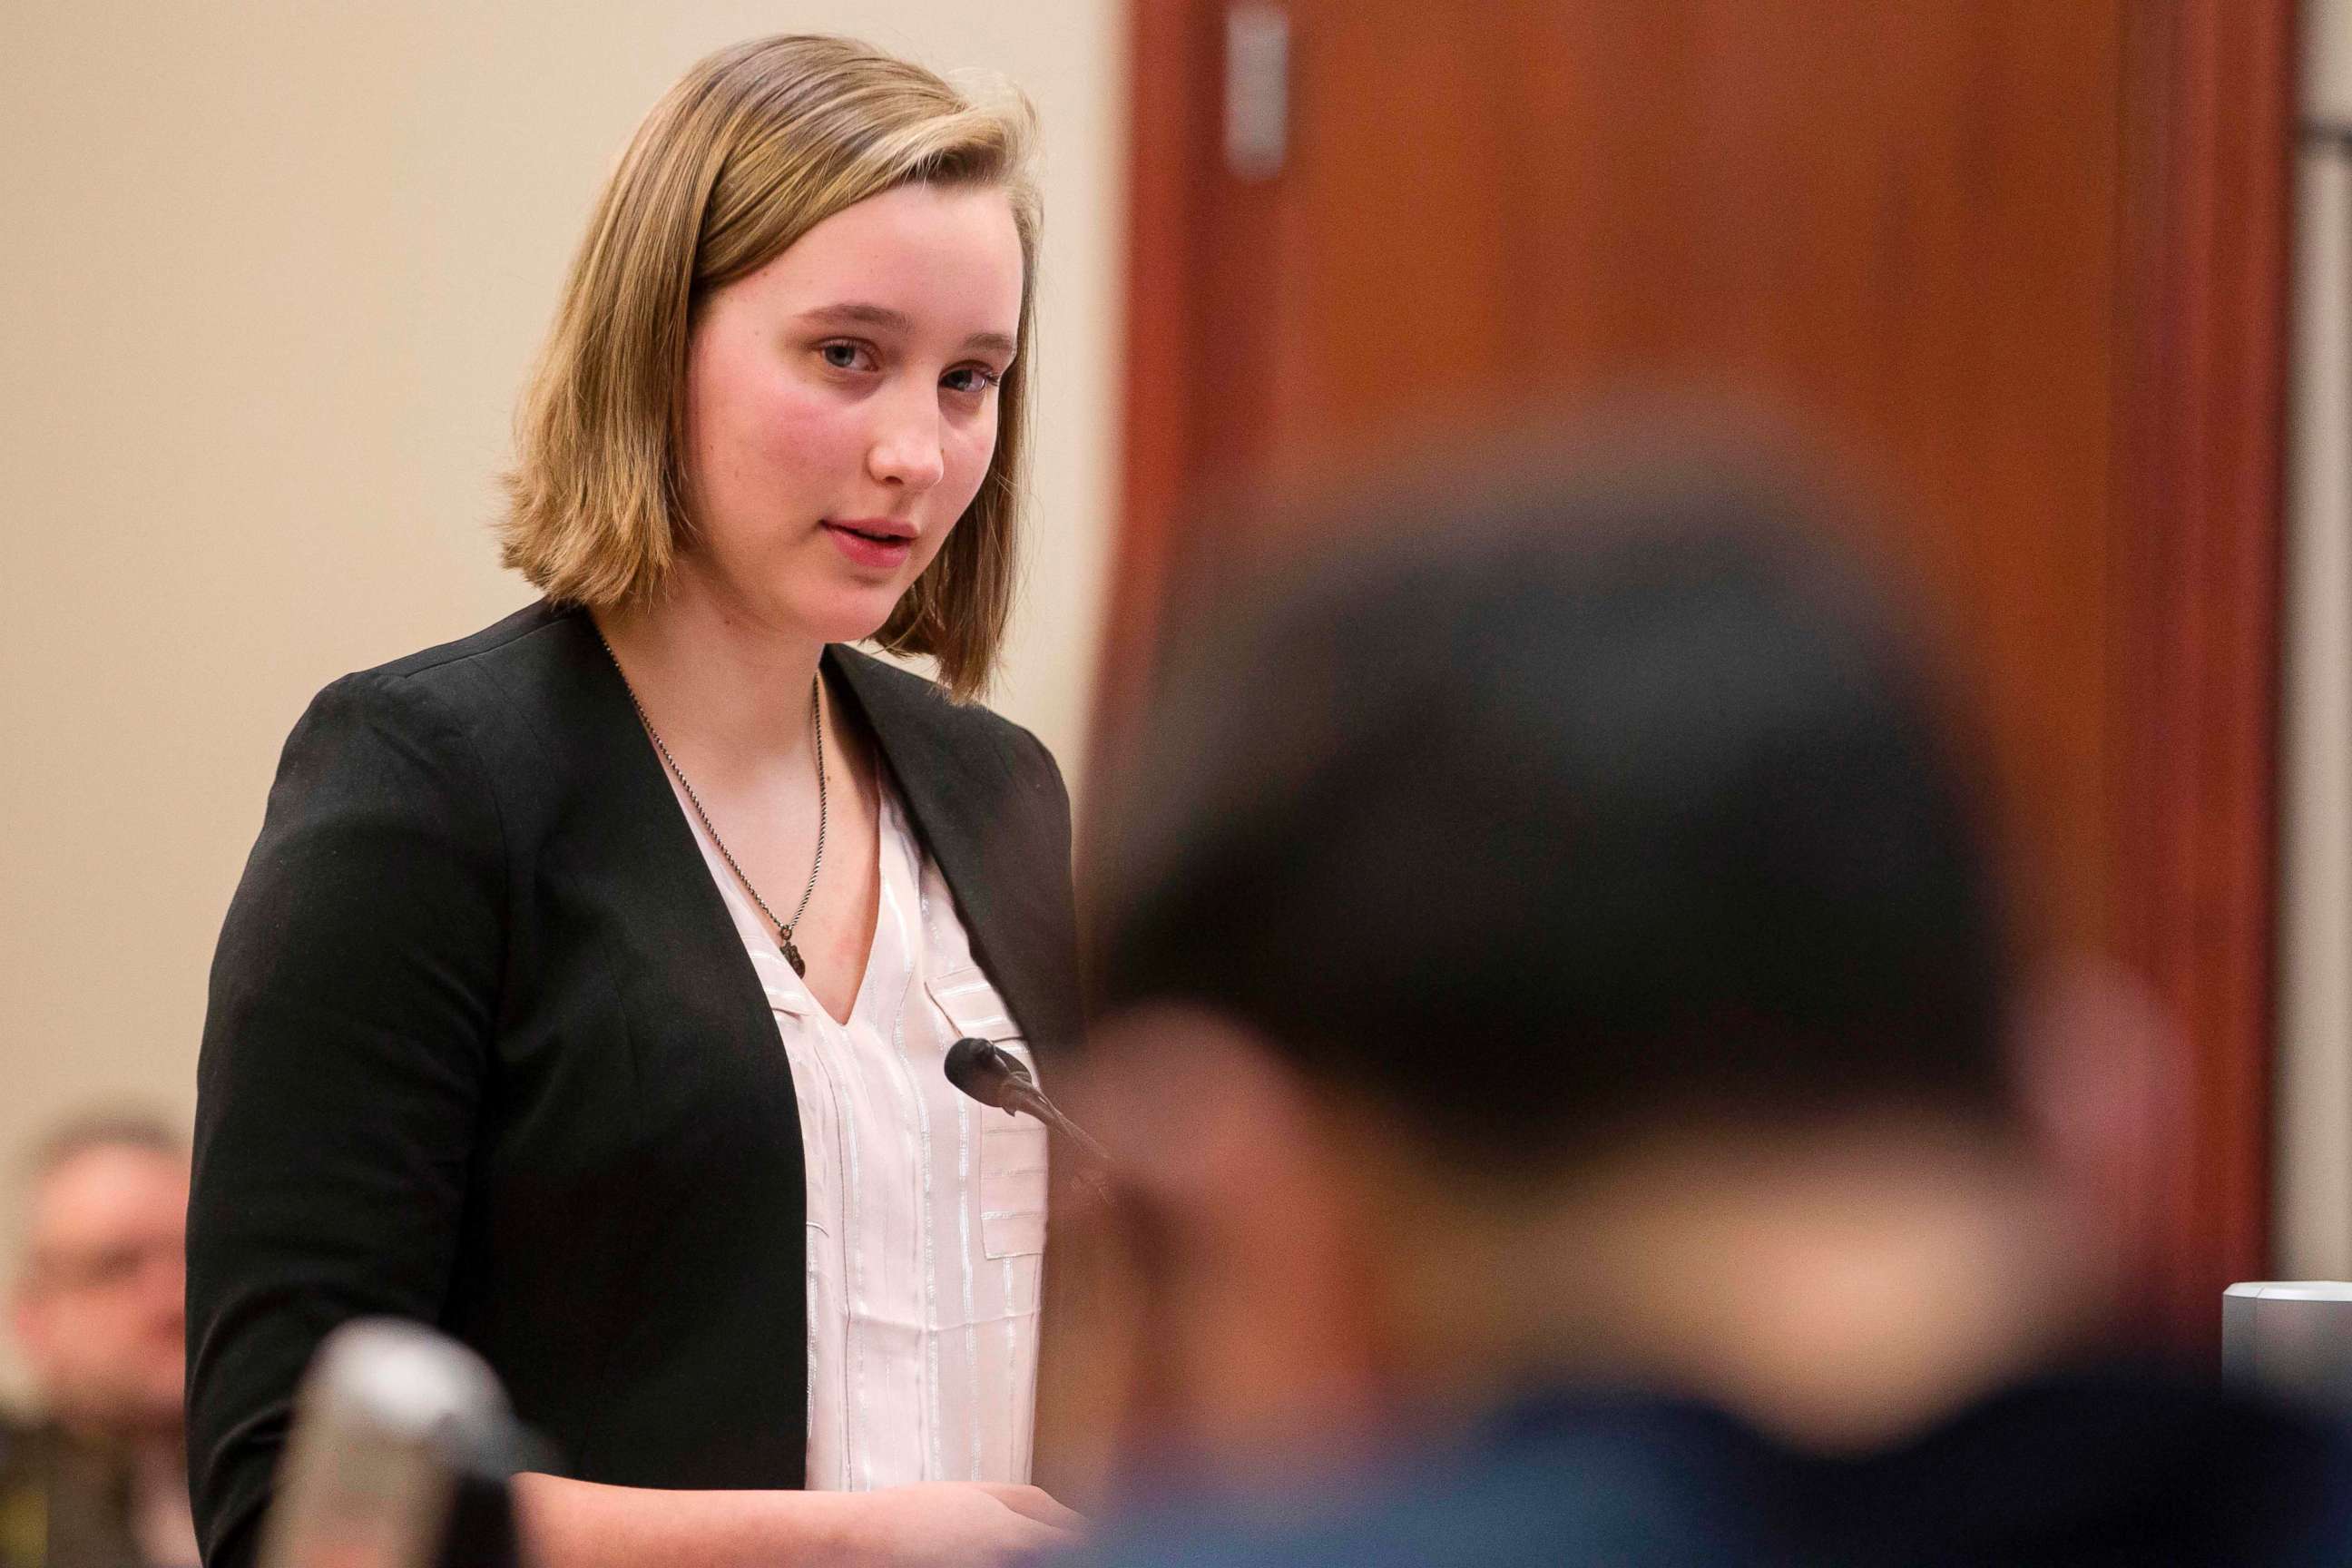 PHOTO: Jessica Thomashow gives her victim impact statement during a sentencing hearing in Lansing, Mich., Jan. 16, 2018.